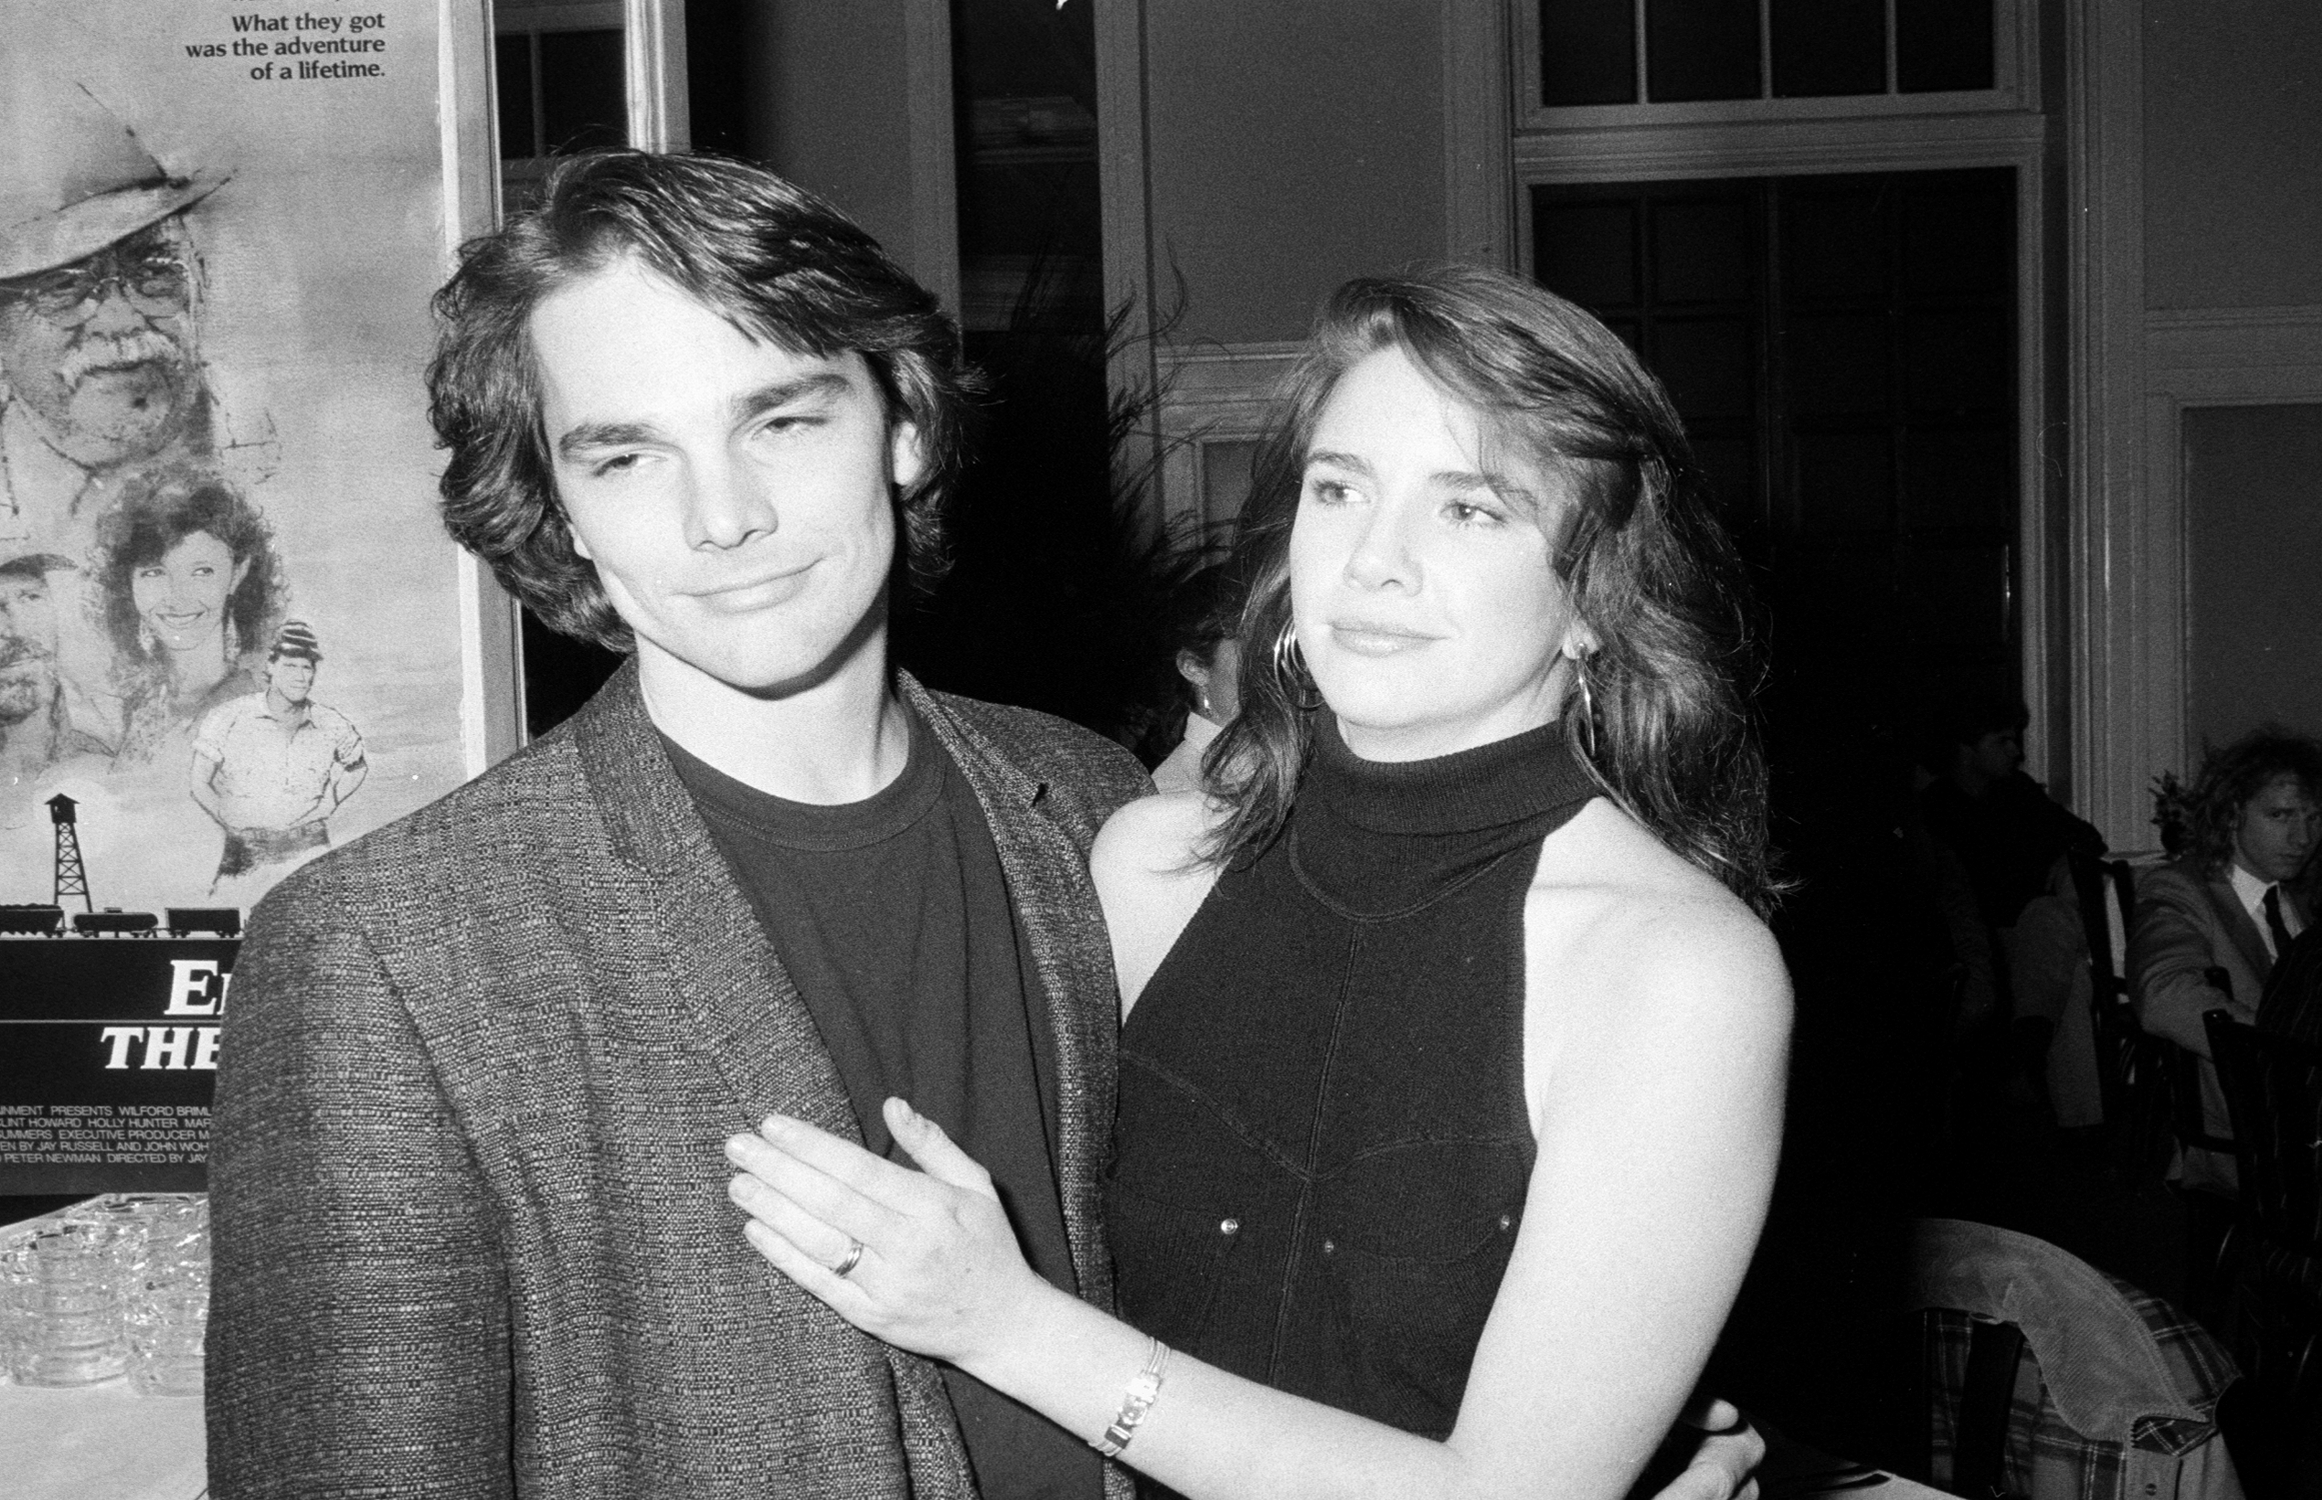 Melissa Gilbert and Bo Brinkman in black and white. Gilbert has her hand on Brinkman's chest as they stand next to each other.